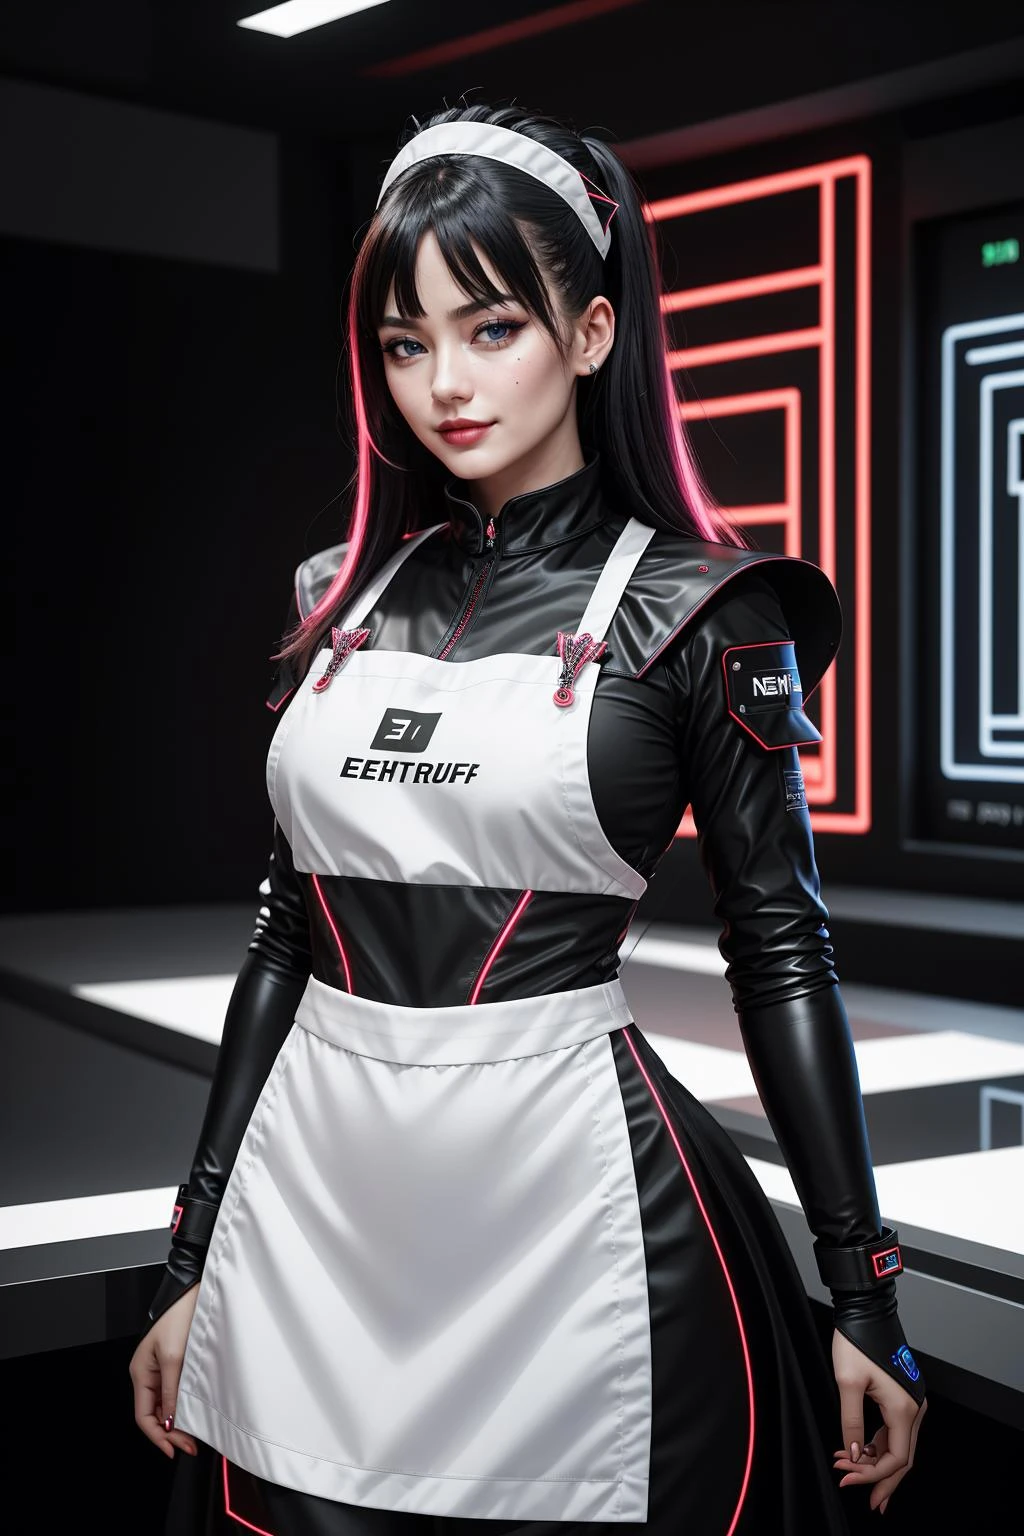 ((Masterpiece, best quality,edgQuality)),smirk,smug,((neons ,electric circuits))
edgFut_clothing,edgApron, apron,a woman in a futuristic outfit standing in a room ,wearing  [edgFut_clothing|edgApron],
 